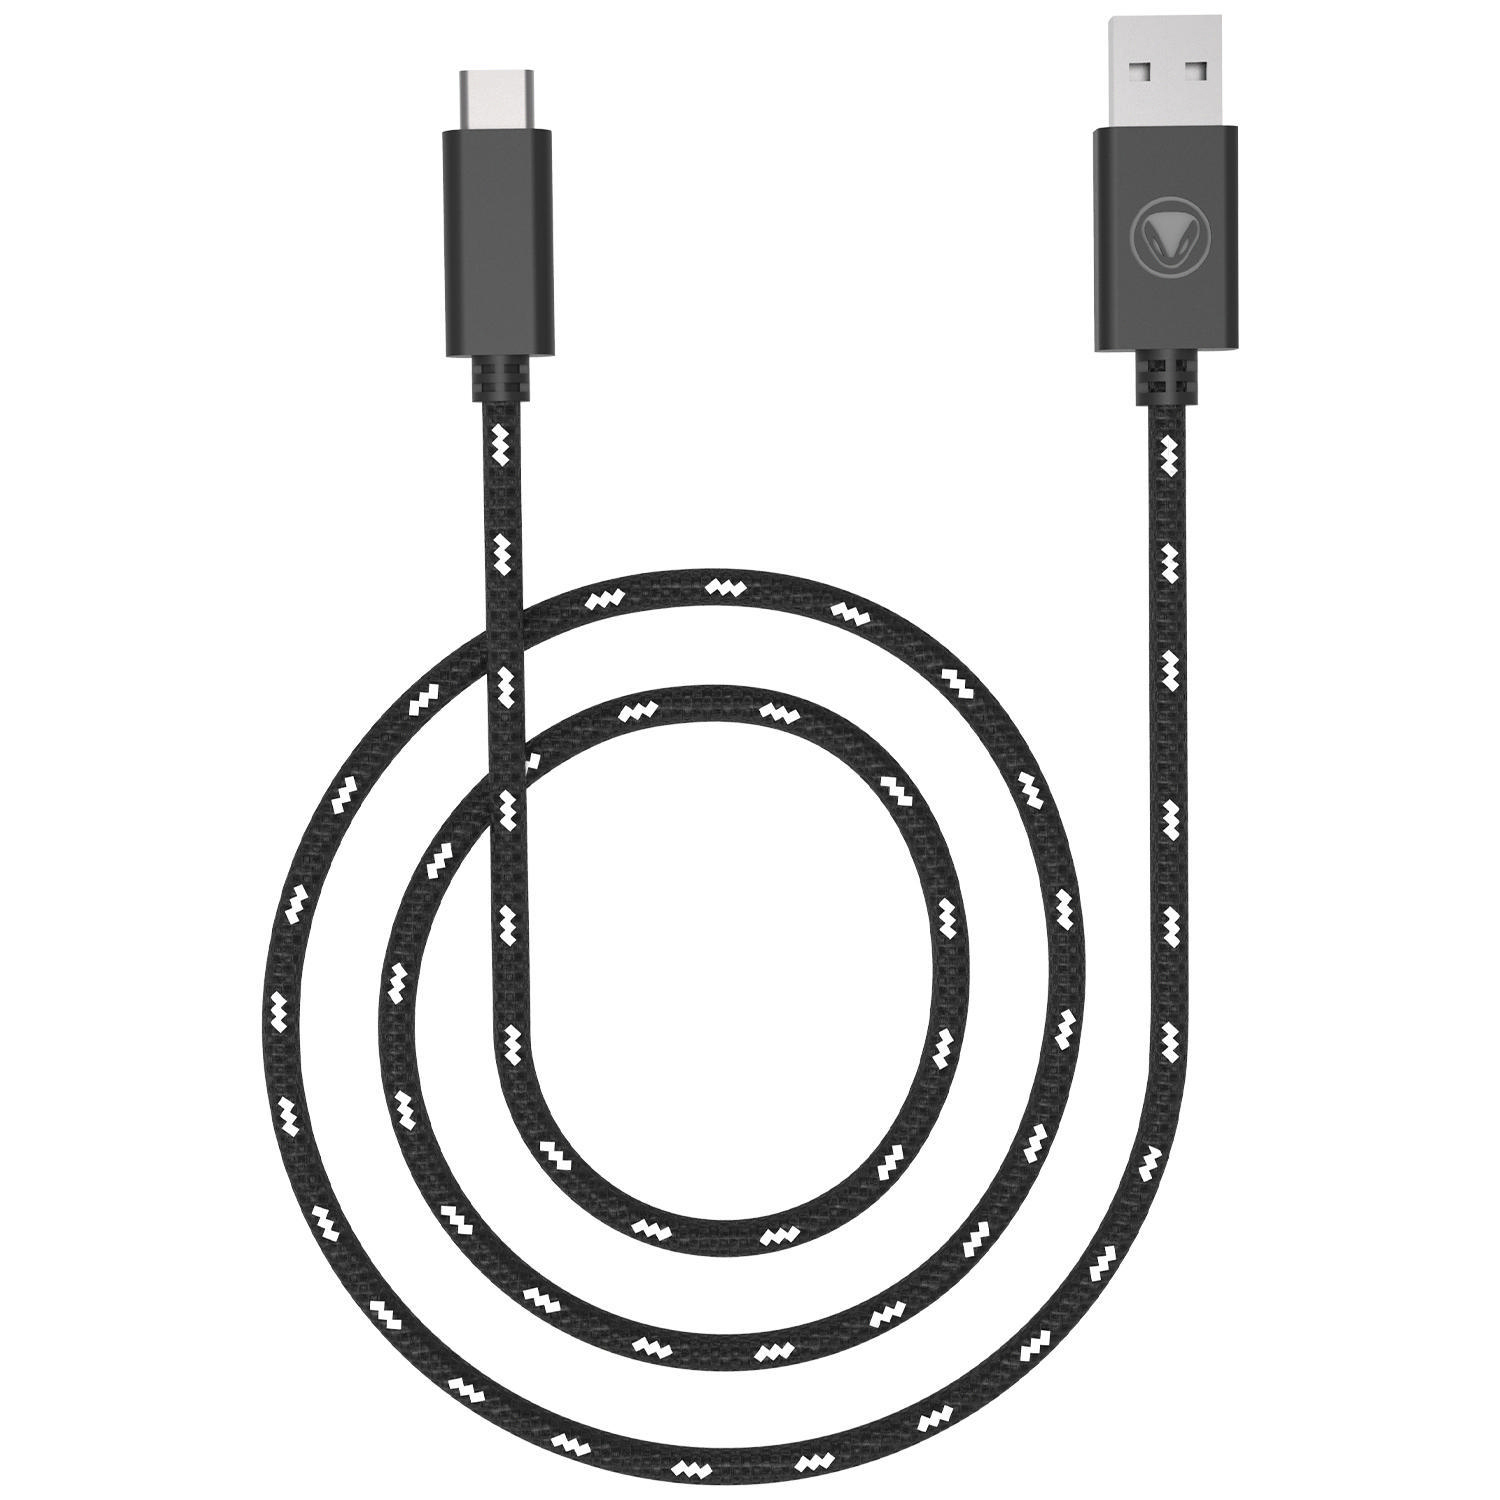 SNAKEBYTE PRO™ Charge: Schwarz/Weiß (5m) 5 USB PS5 Ladekabel, 2.0 Cable